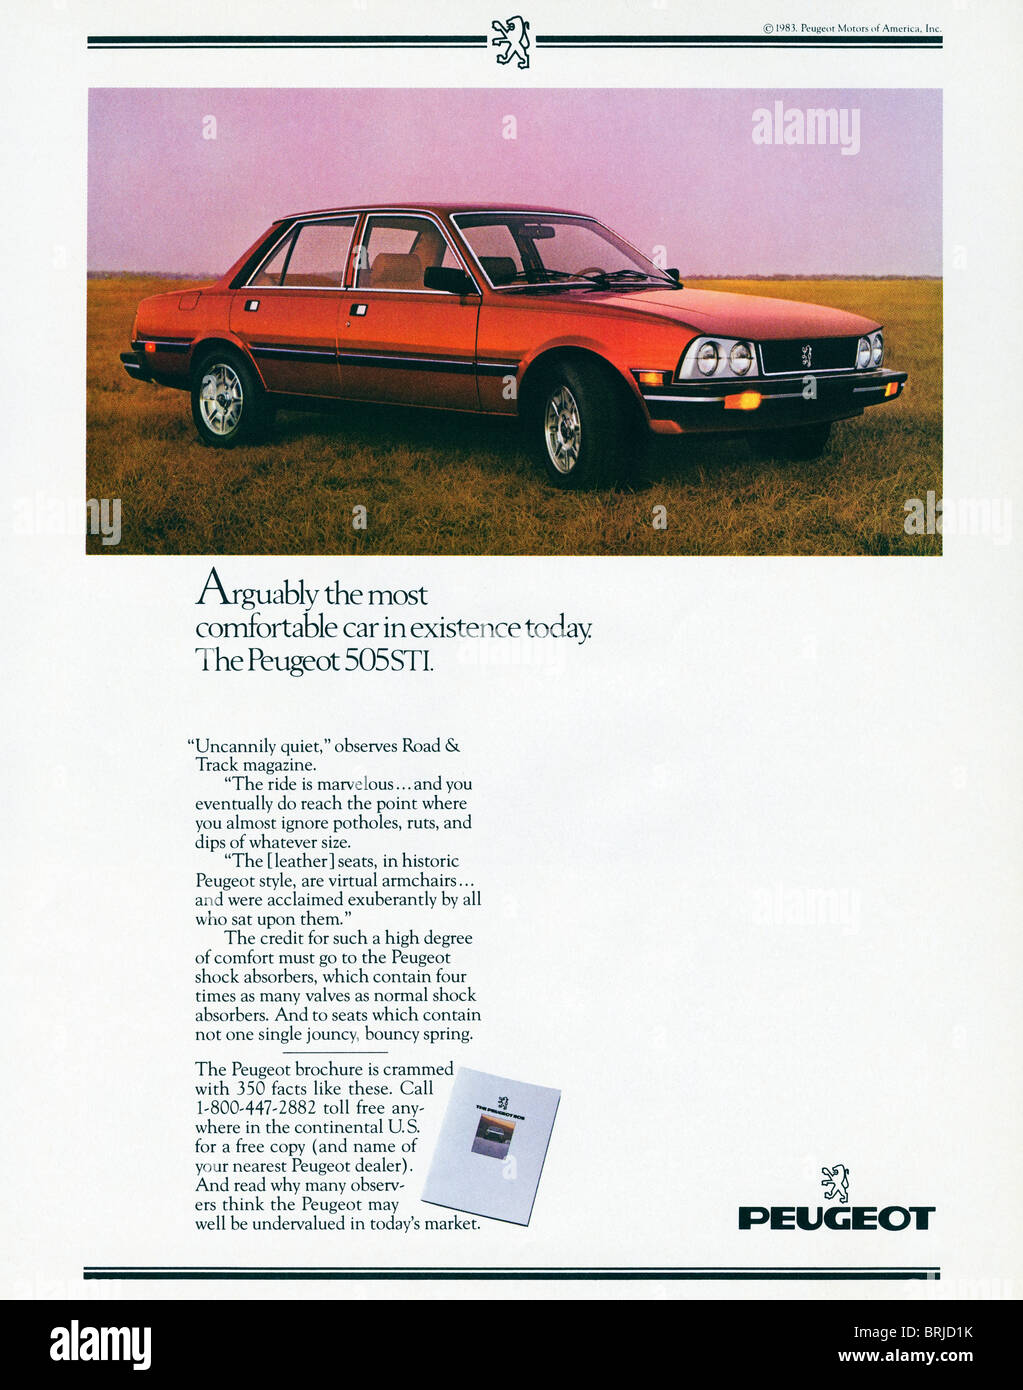 Colour advert for Peugeot cars in American fashion magazine circa 1983 Stock Photo